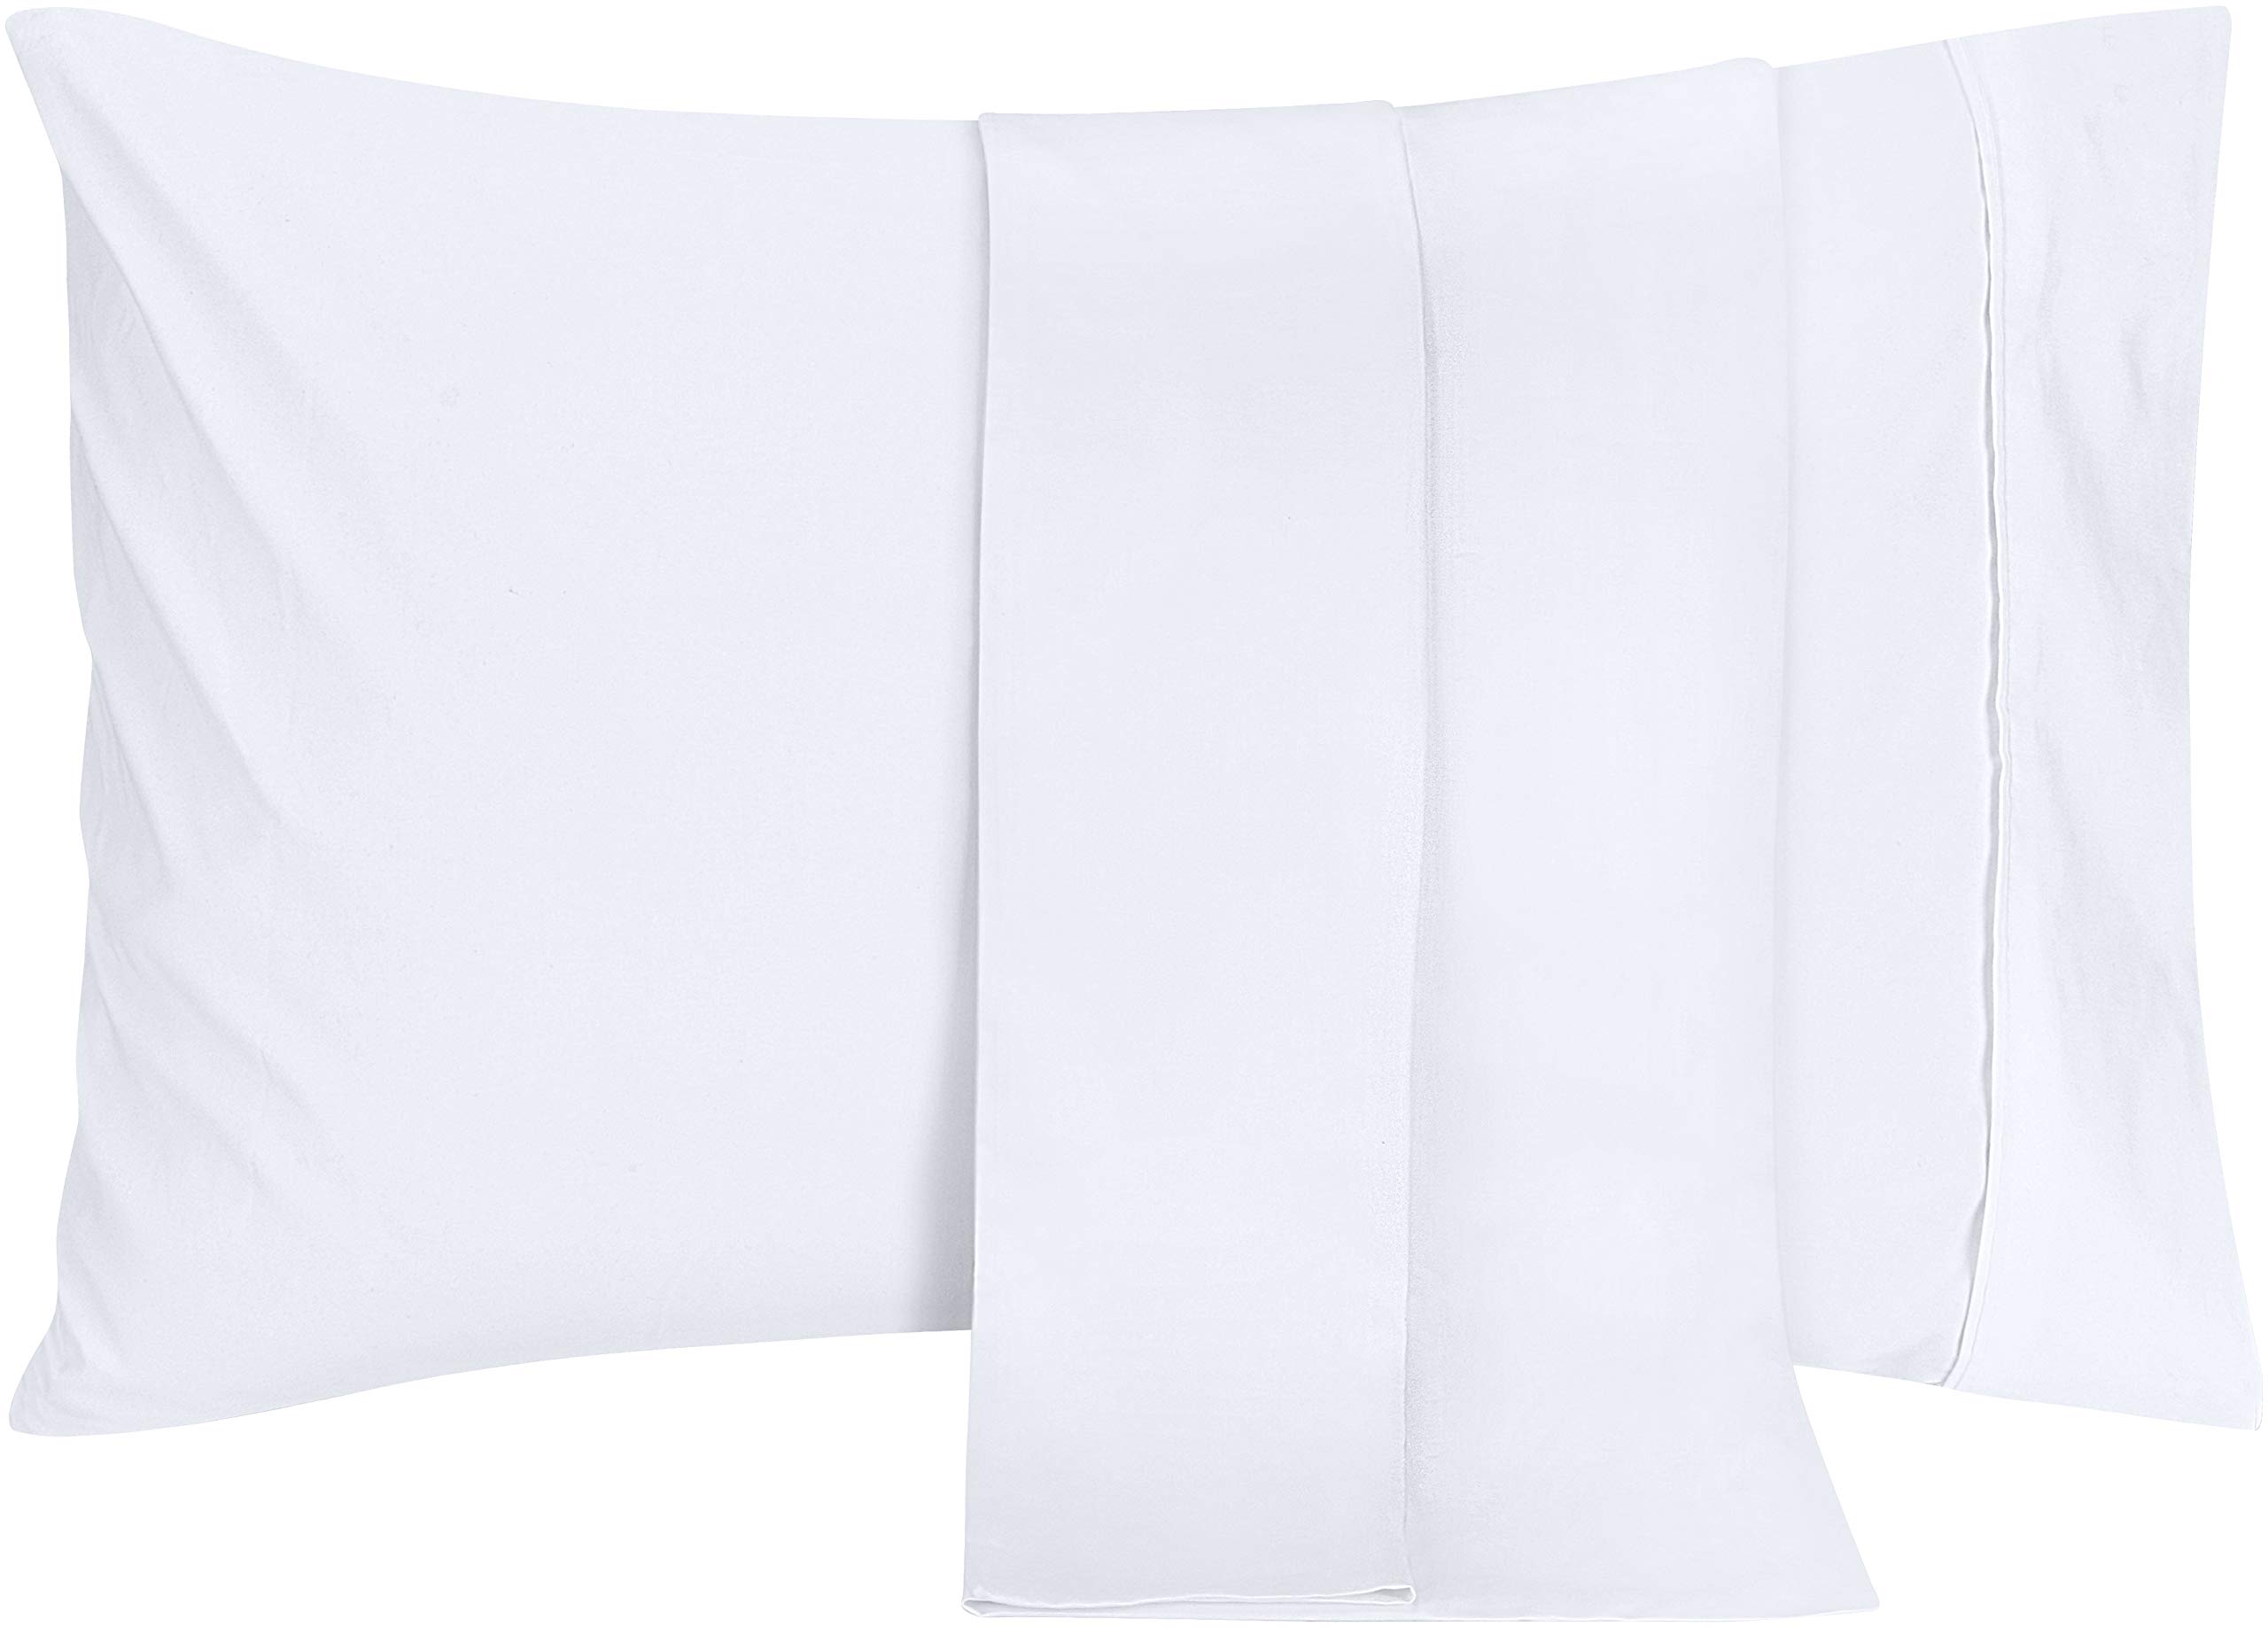 Book Cover Utopia Bedding Queen Pillowcases - 2 Pack - Envelope Closure - Soft Brushed Microfiber Fabric - Shrinkage and Fade Resistant Pillow Covers Standard Size 20 X 30 Inches (Queen, White) Queen White